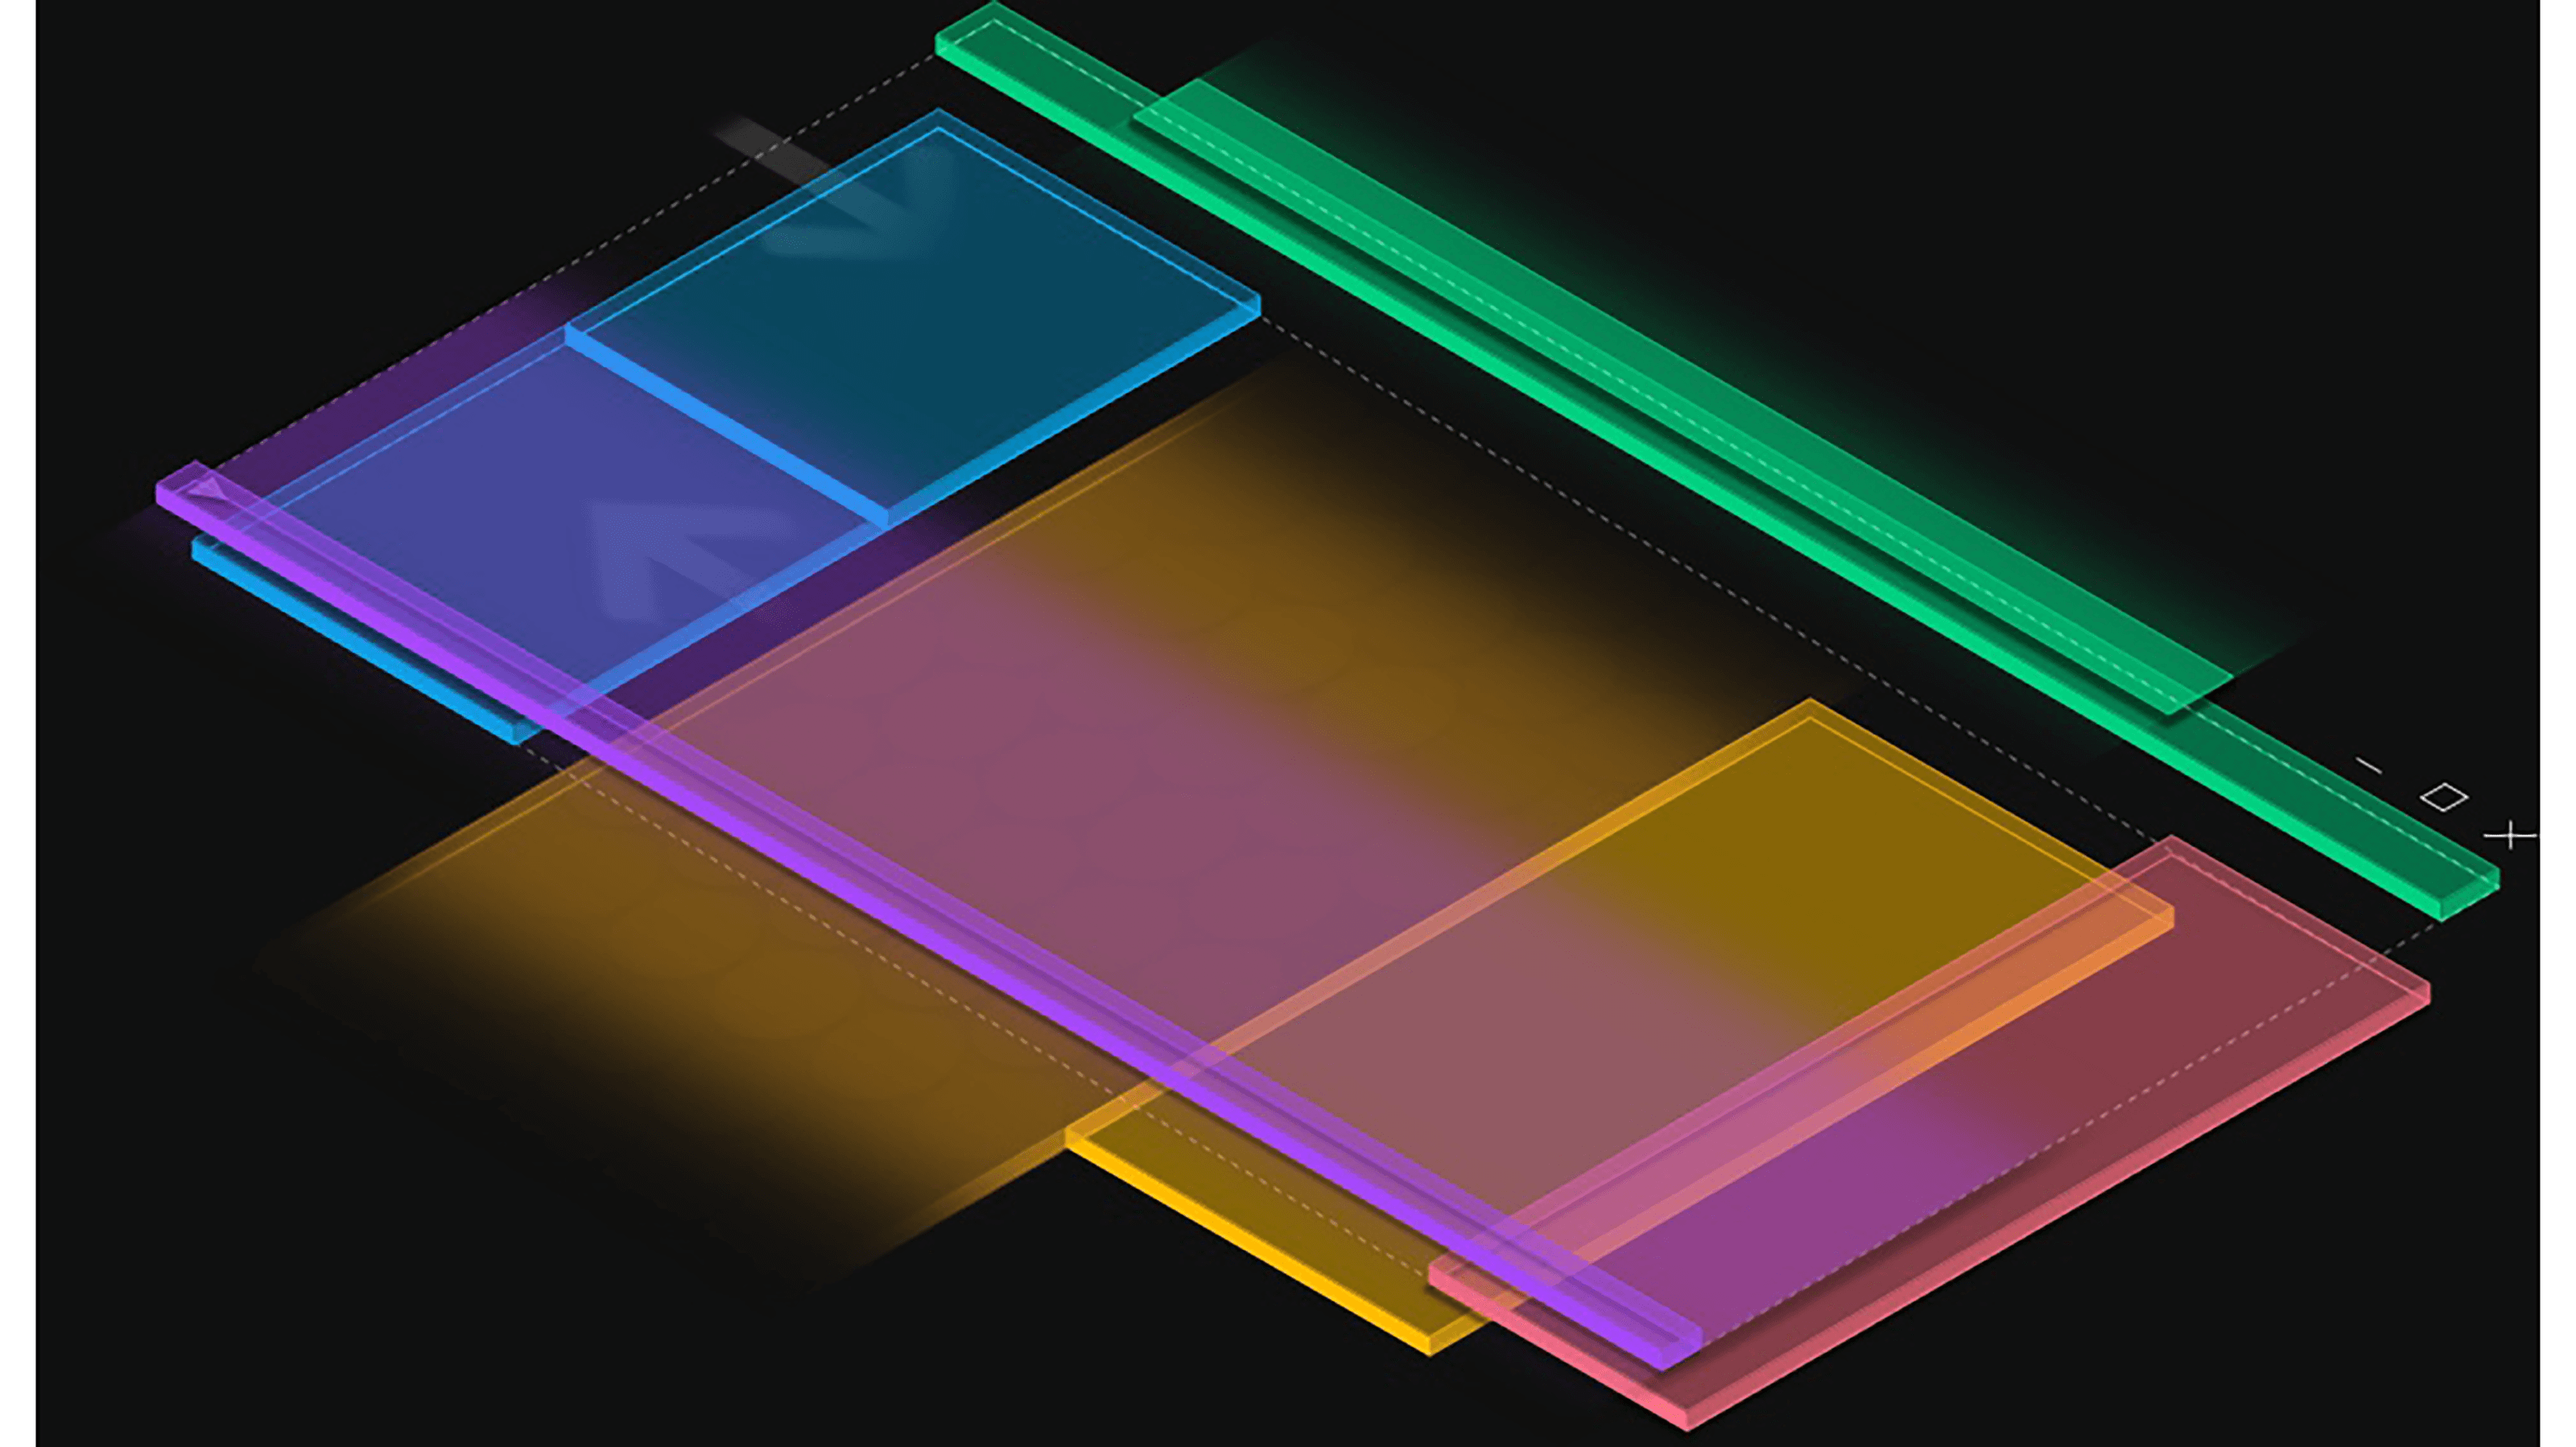 A rendering of color exploration with pink, purple, blue, yellow, and green translucent blocks